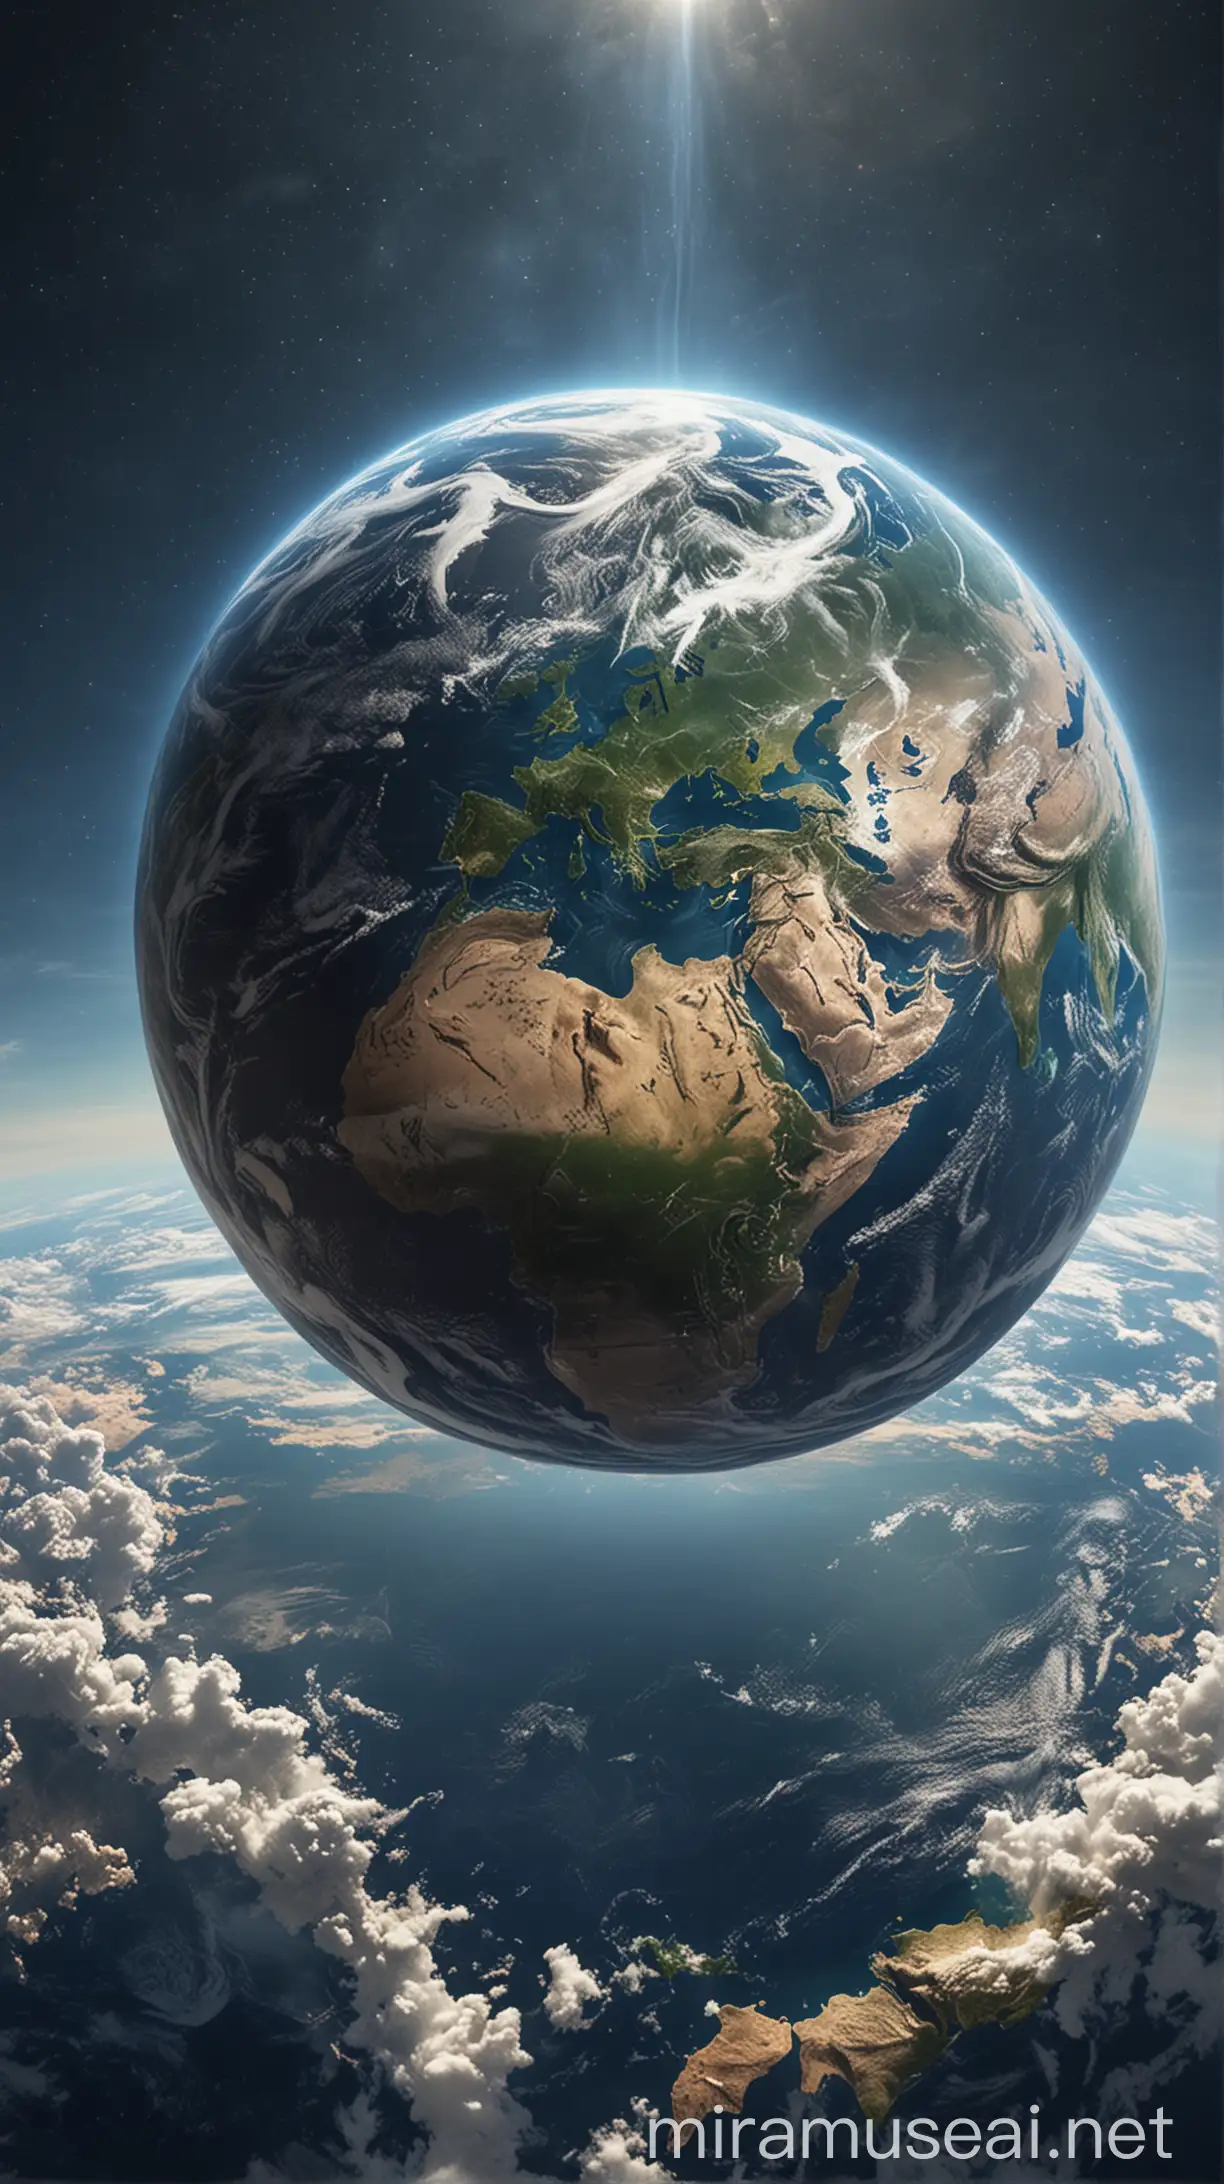 vA serene and majestic image of the Earth, symbolizing stability and nurturing. hyper realistic